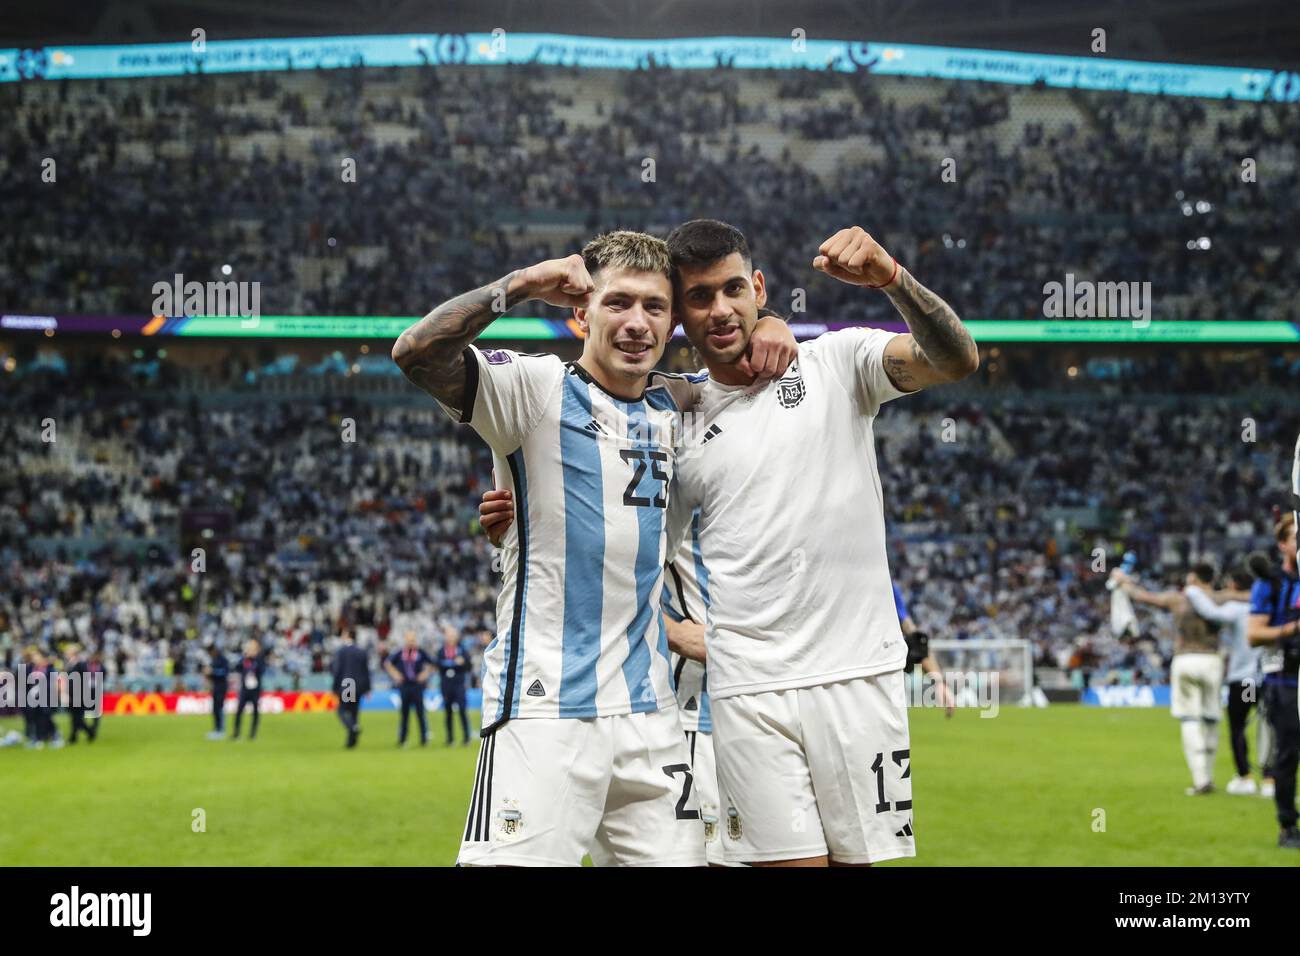 Al Daayen, Qatar. 09th Dec, 2022. AL DAAYEN - (lr) Lisandro Martinez of Argentina, Cristian Romero of Argentina celebrate victory after the FIFA World Cup Qatar 2022 quarterfinal match between the Netherlands and Argentina at Lusail Stadium on December 9, 2022 in Al Daayen, Qatar. ANP MAURICE VAN STEEN netherlands out - belgium out Credit: ANP/Alamy Live News Stock Photo